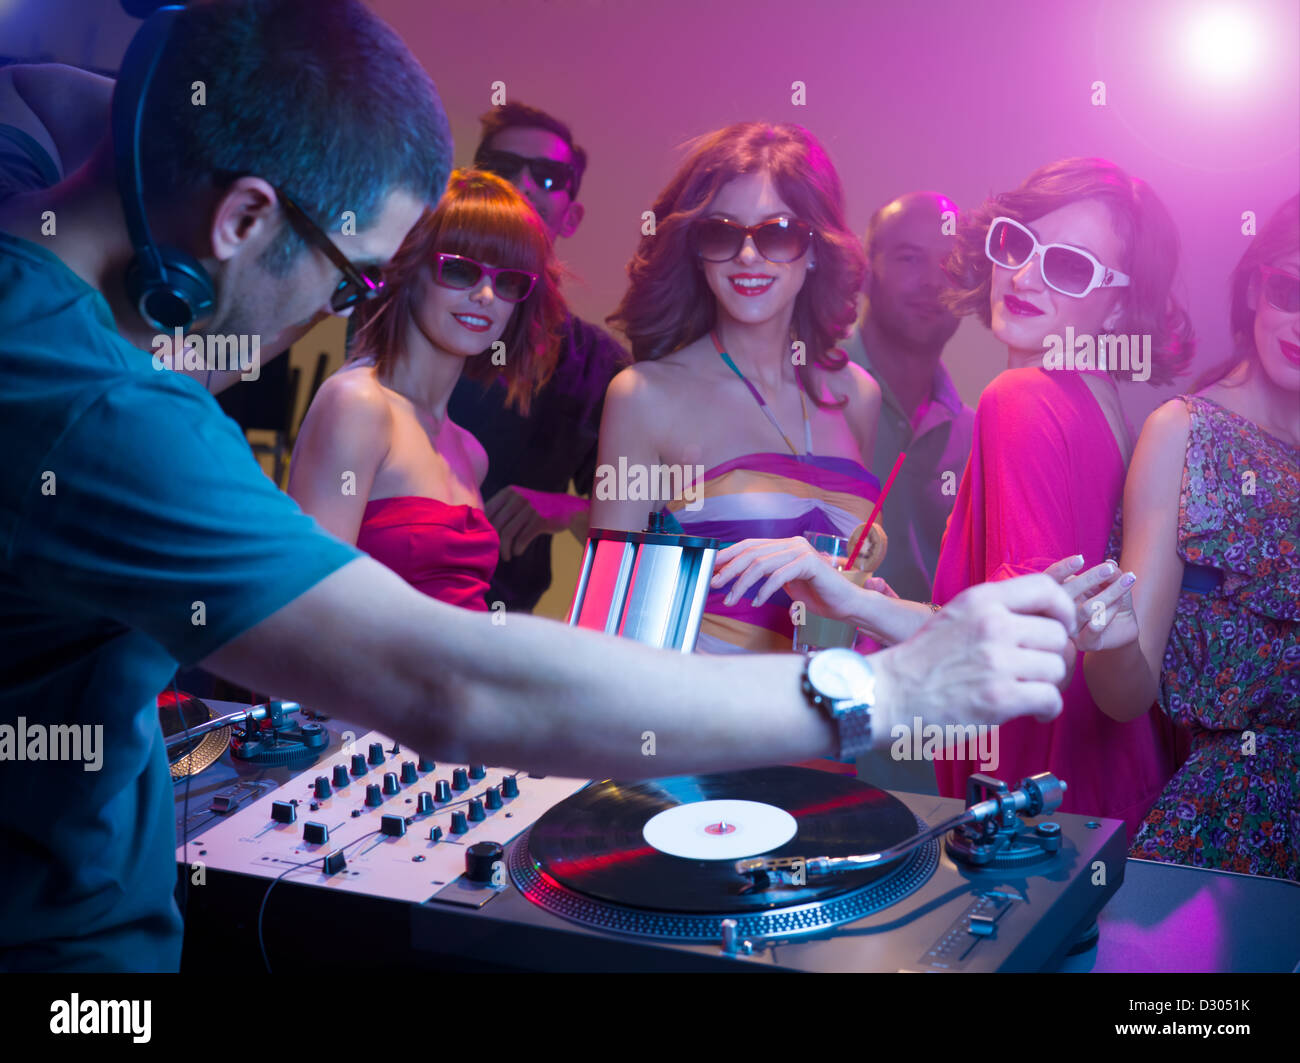 male dj playing music with turntables and headphones at a party with ...